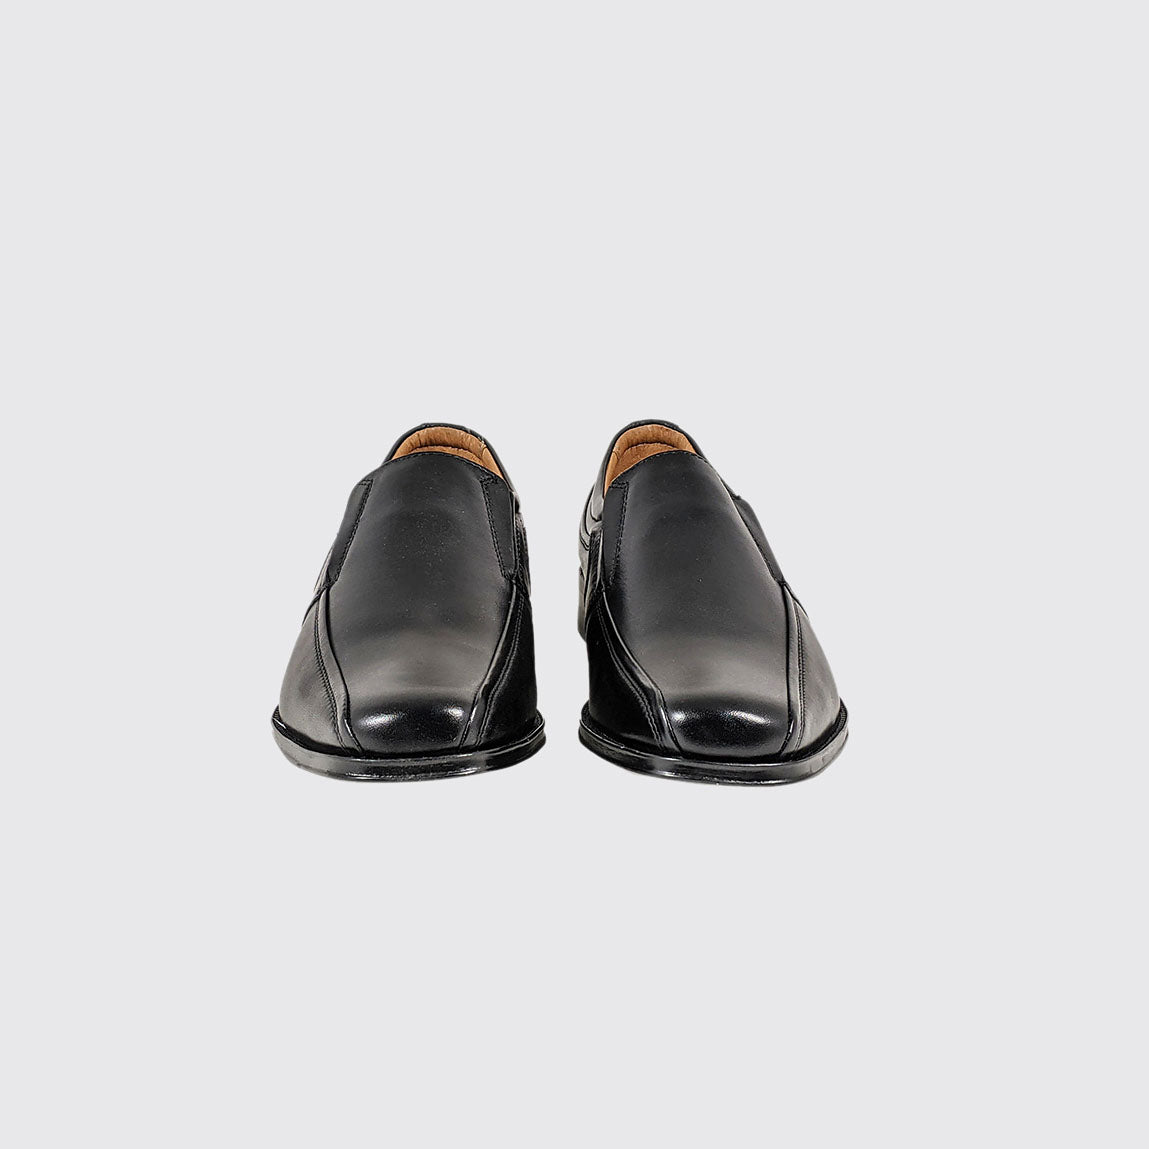 Frontal view of the pair of Dubarry Declan Black shoes.